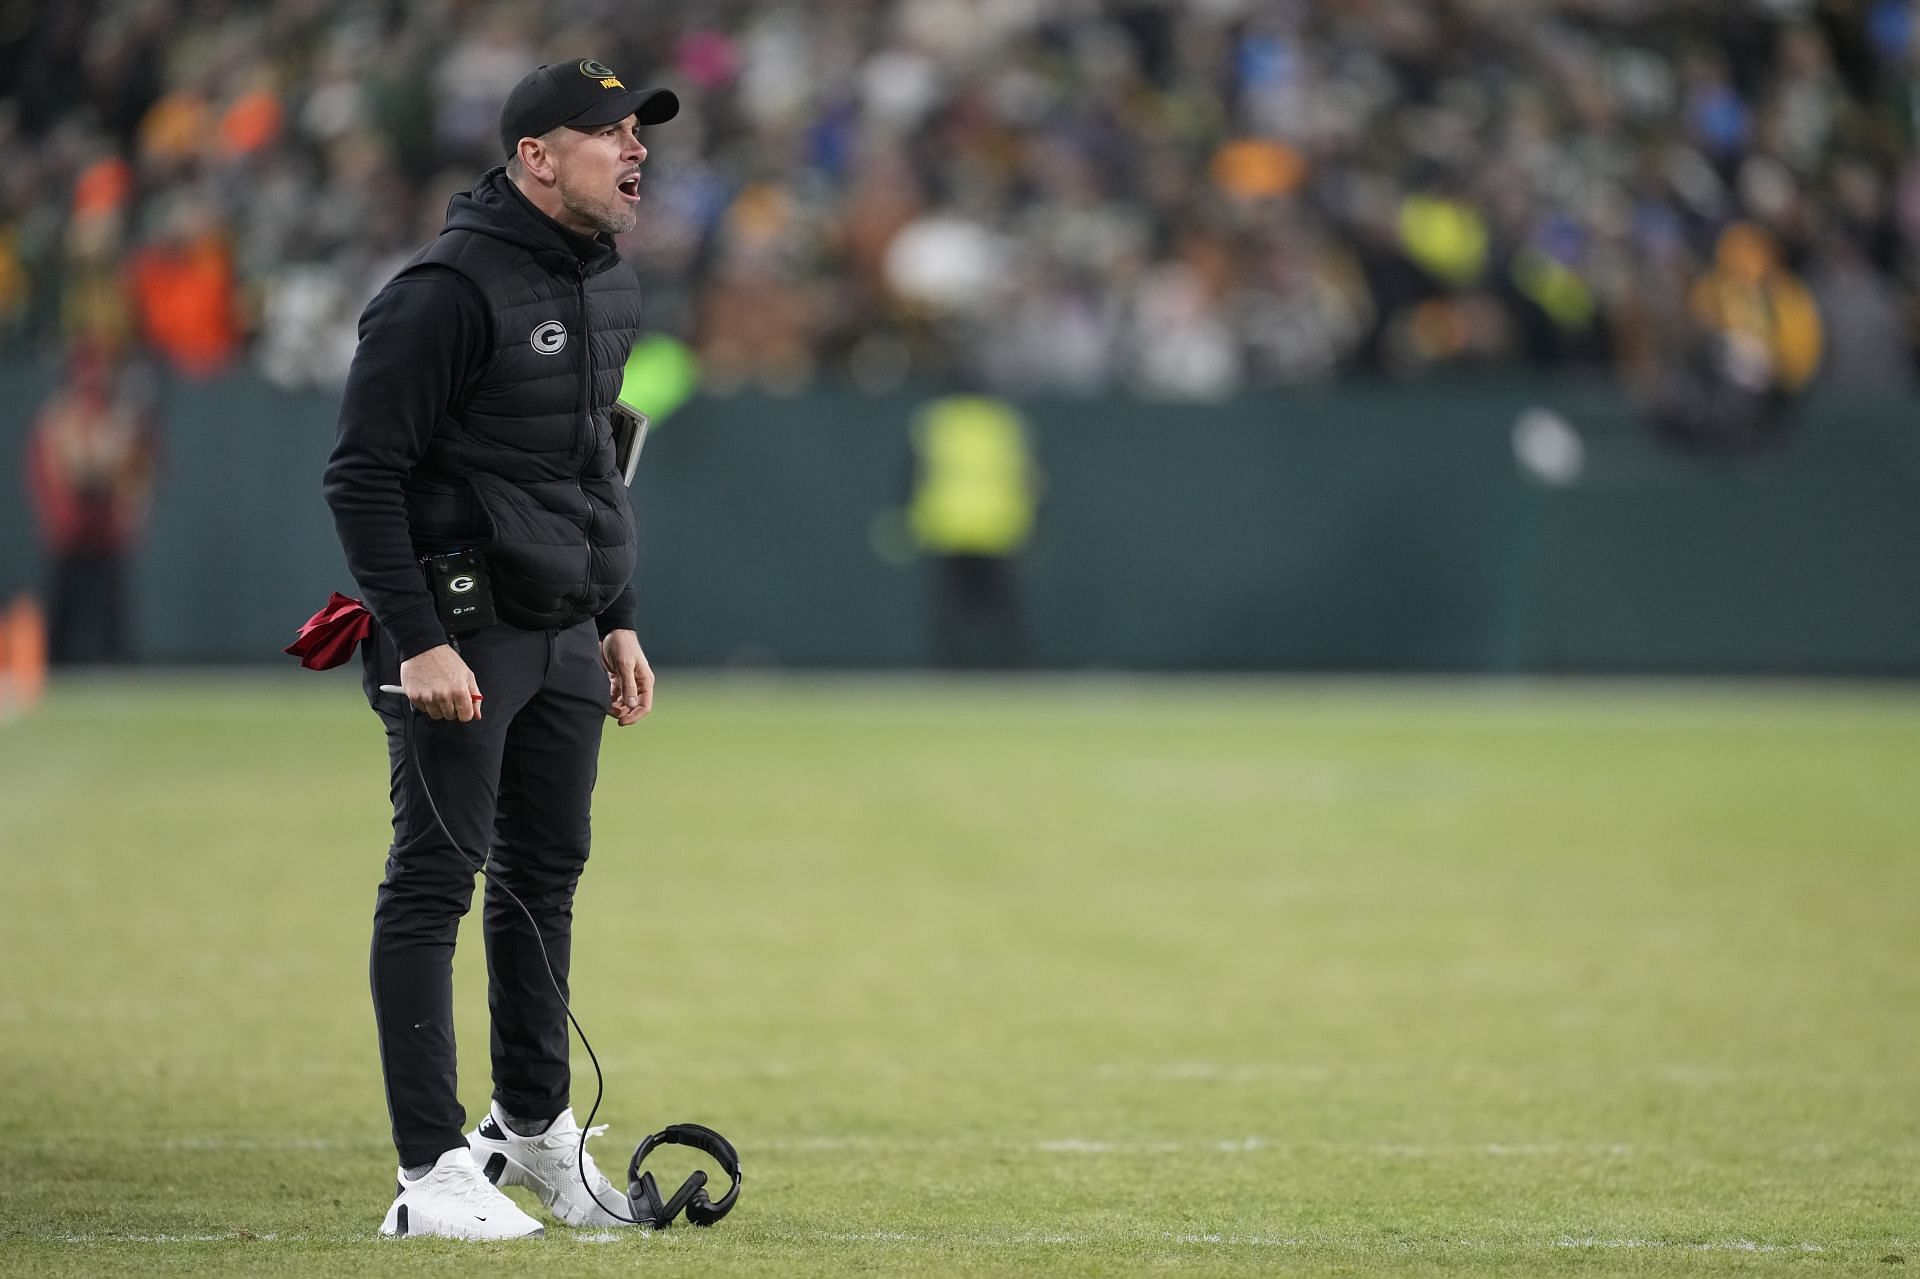 Who is the lowest paid NFL coach?